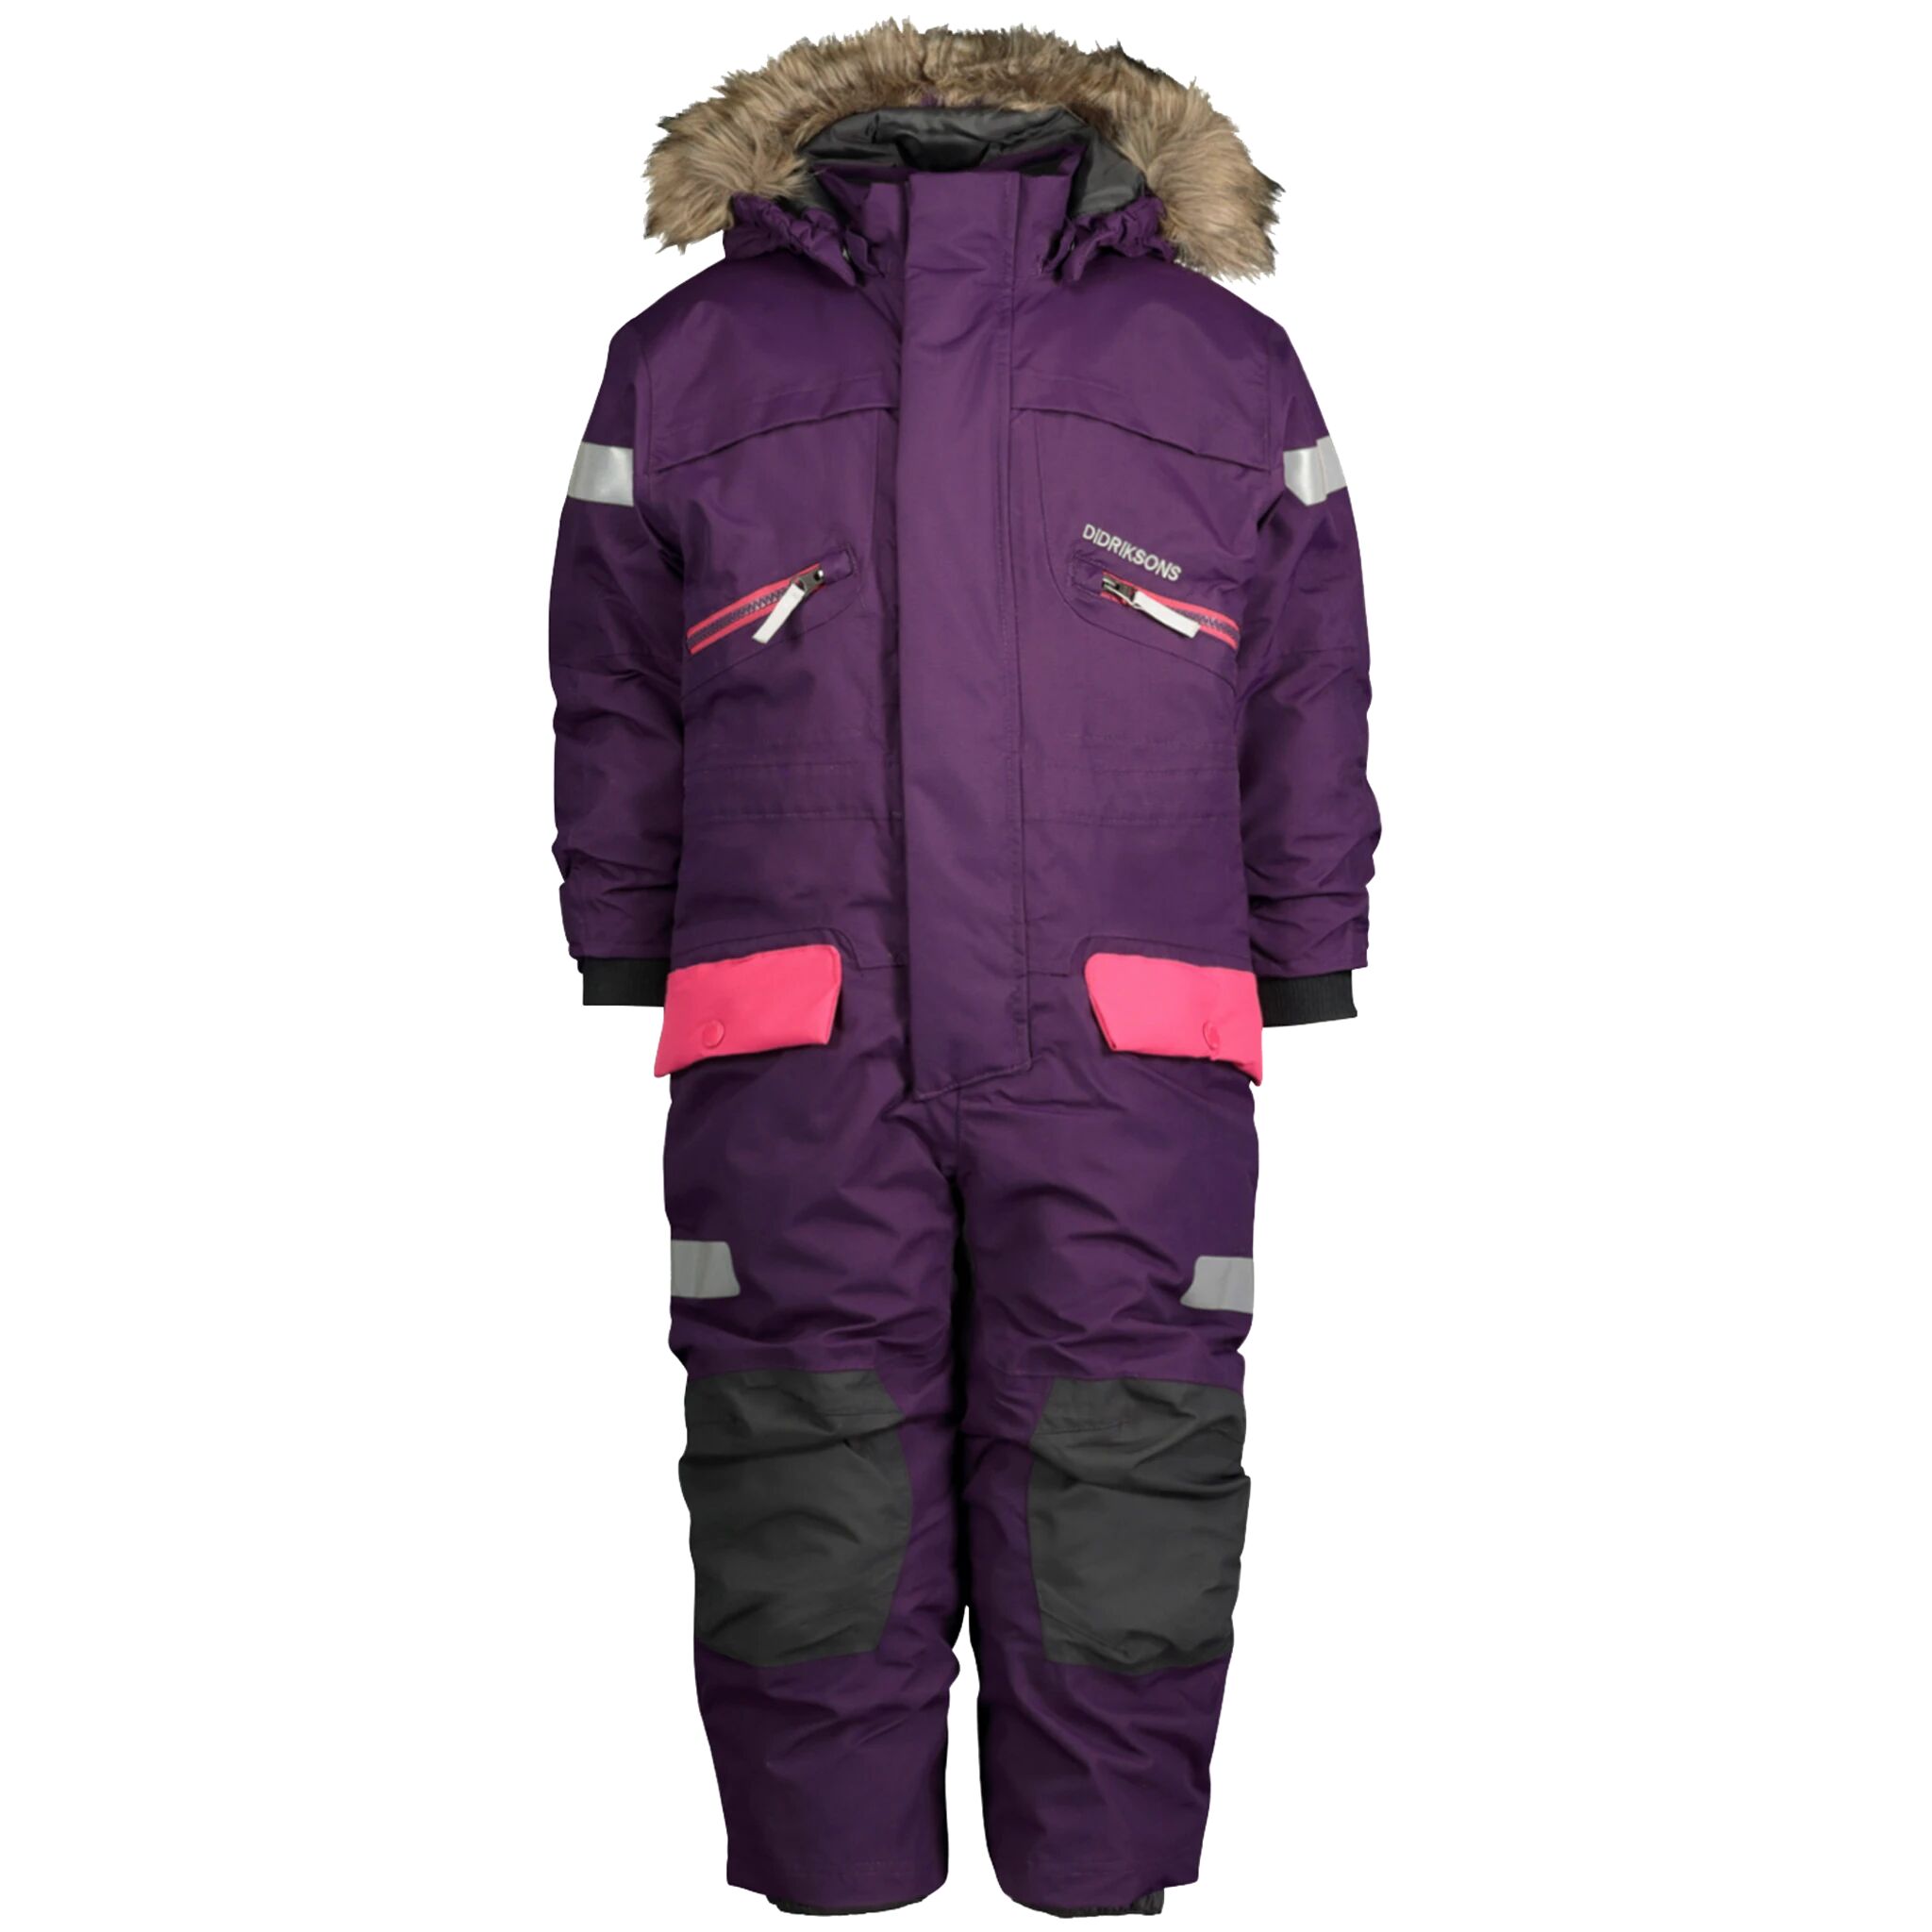 Didriksons Theron 2 Coverall, vinterdress barn 90 Violet